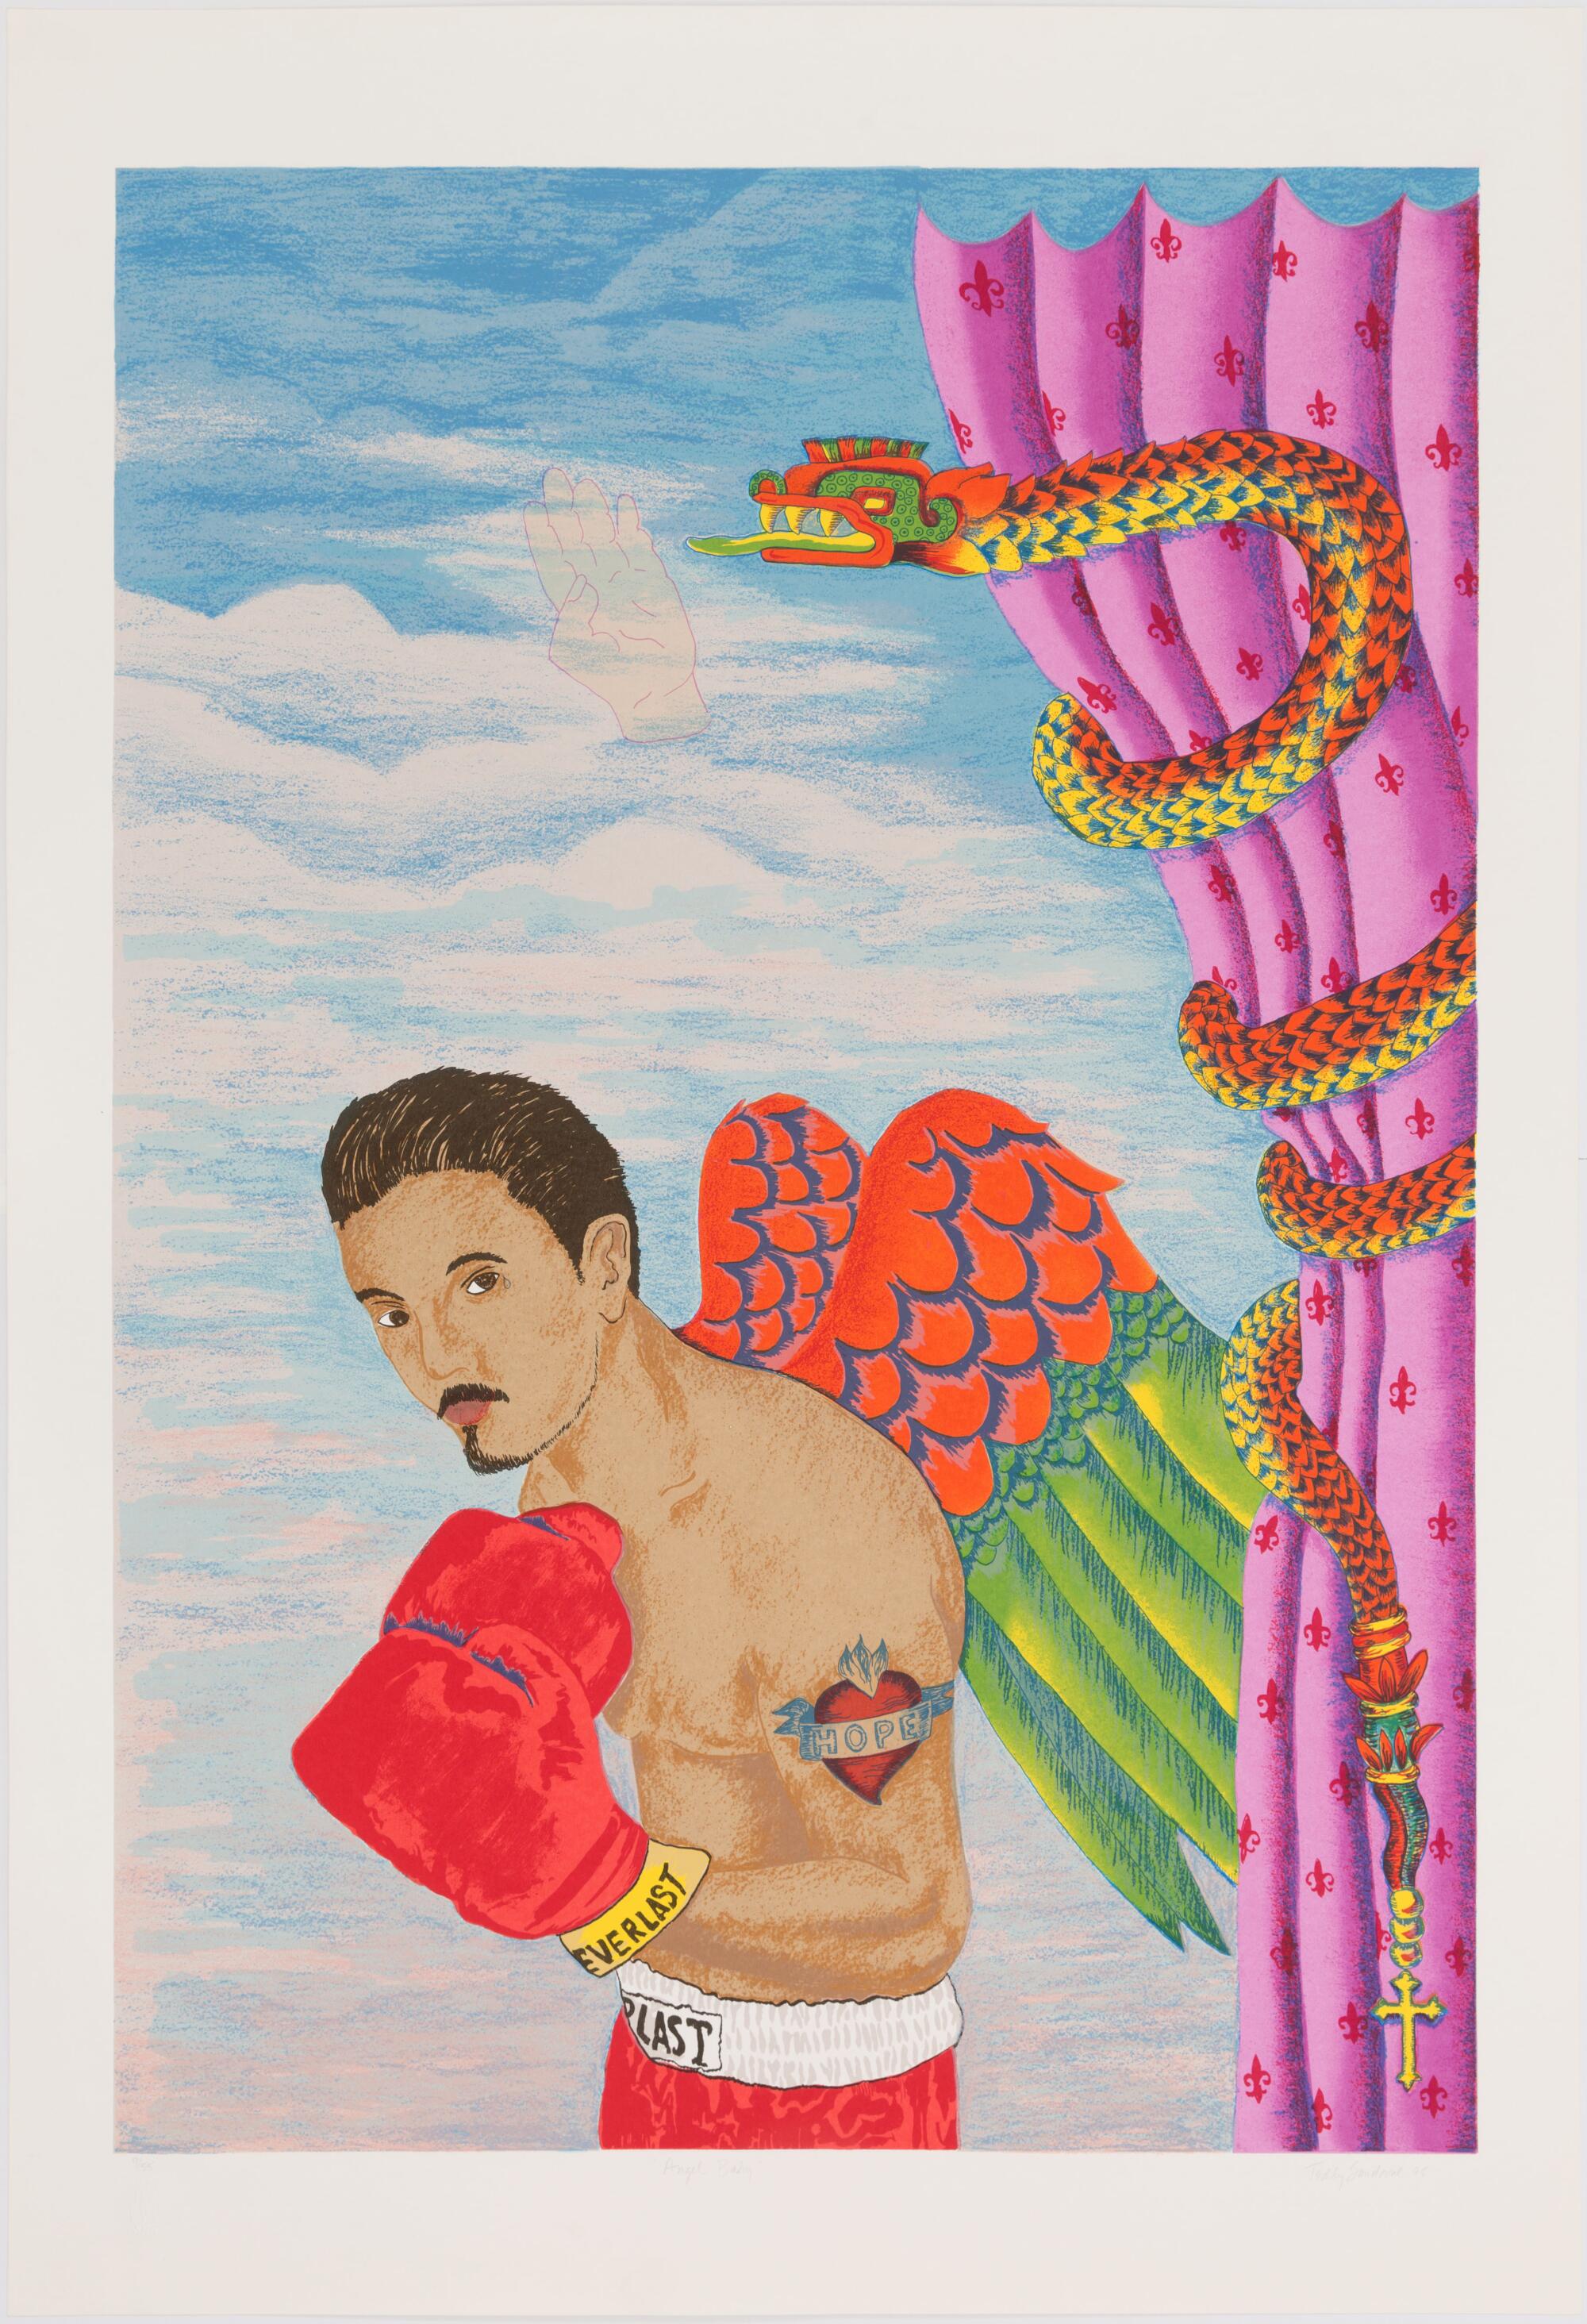 A print shows a beautiful young boxer in fighting stance. He is framed by sky and a pink curtain and has colorful wings.